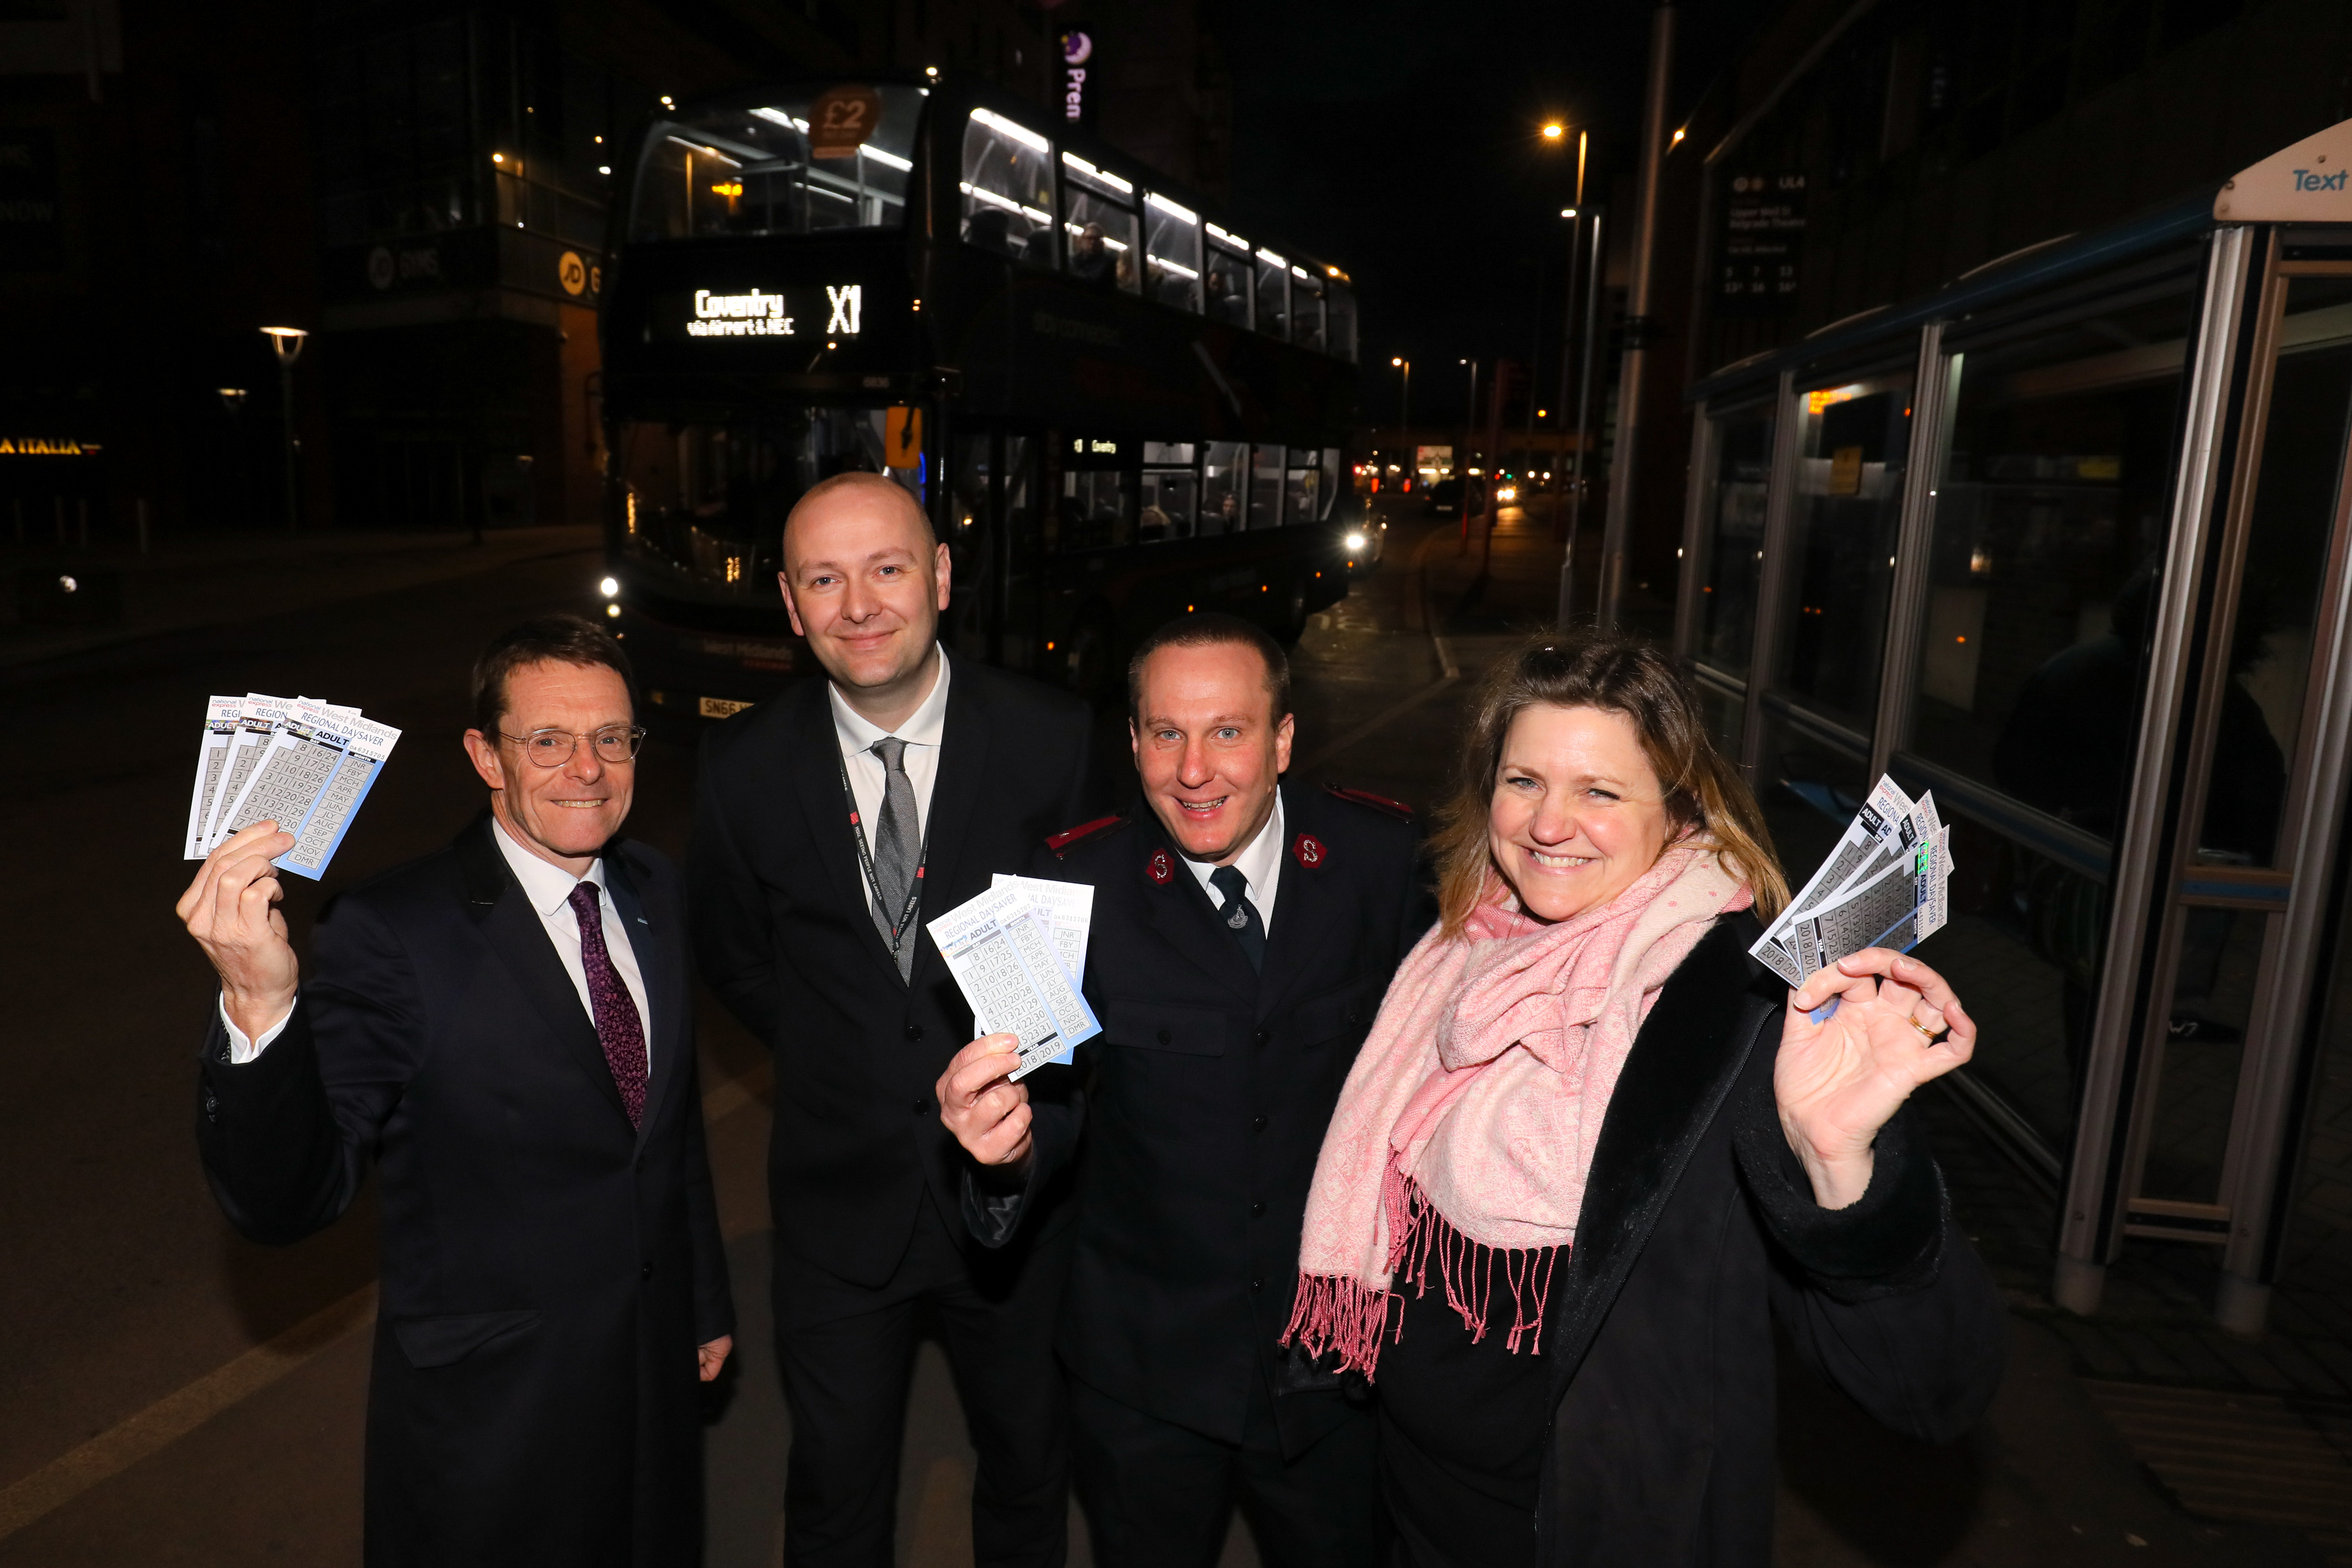 Mayor of the West Midlands Andy Street with Nathan Slinn, the Salvation Army's regional manager for homelessness services, Martyn Evans, the Salvation Army chaplain from the Harnall Lifehouse outreach service and Ali Bell, head of external communications from National Express West Midlands